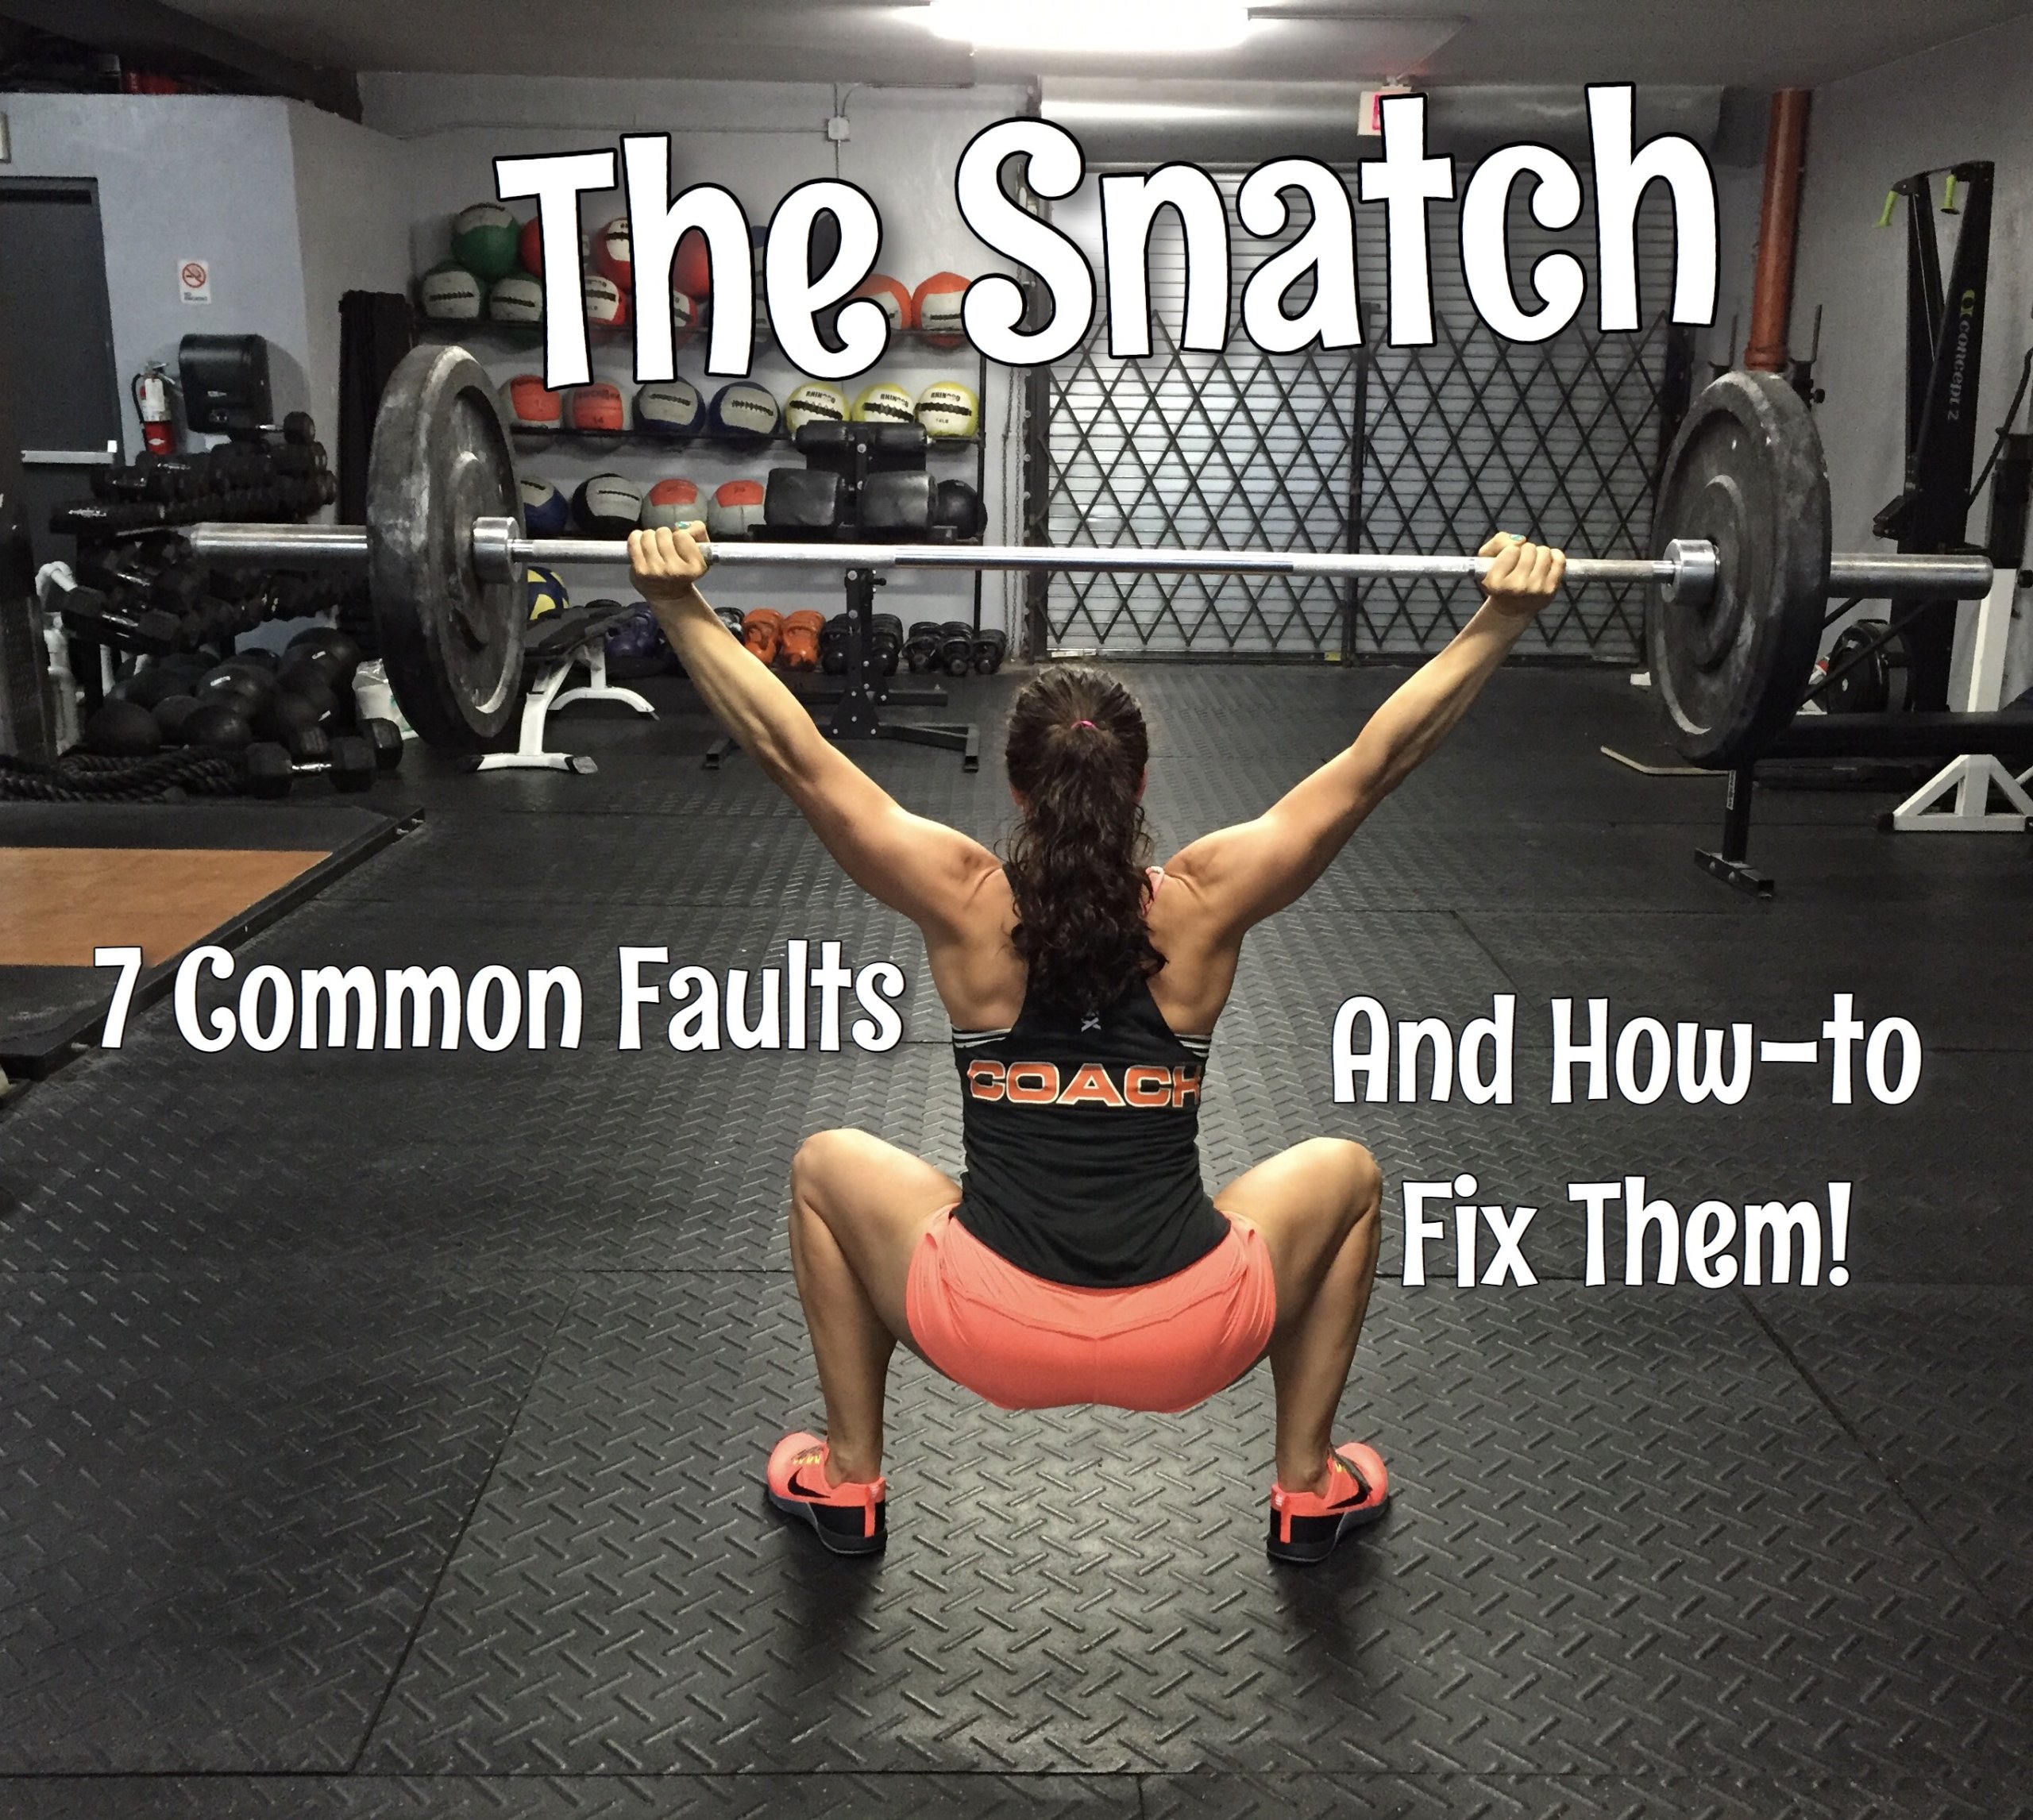 The Snatch – 7 Common Faults and How-to Fix Them